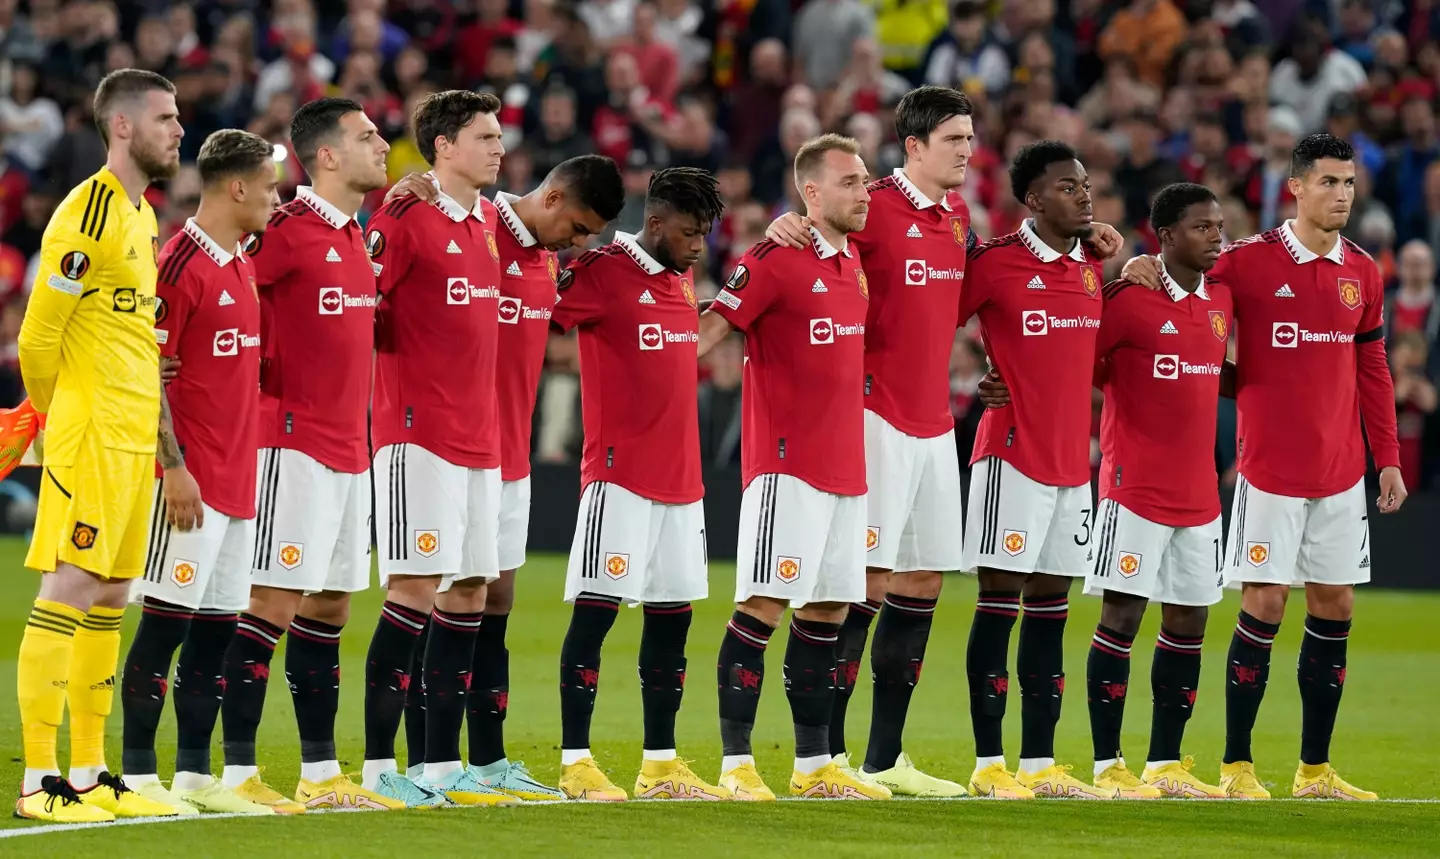 Manchester United players pay their respects to Queen Elizabeth II. (Alamy)